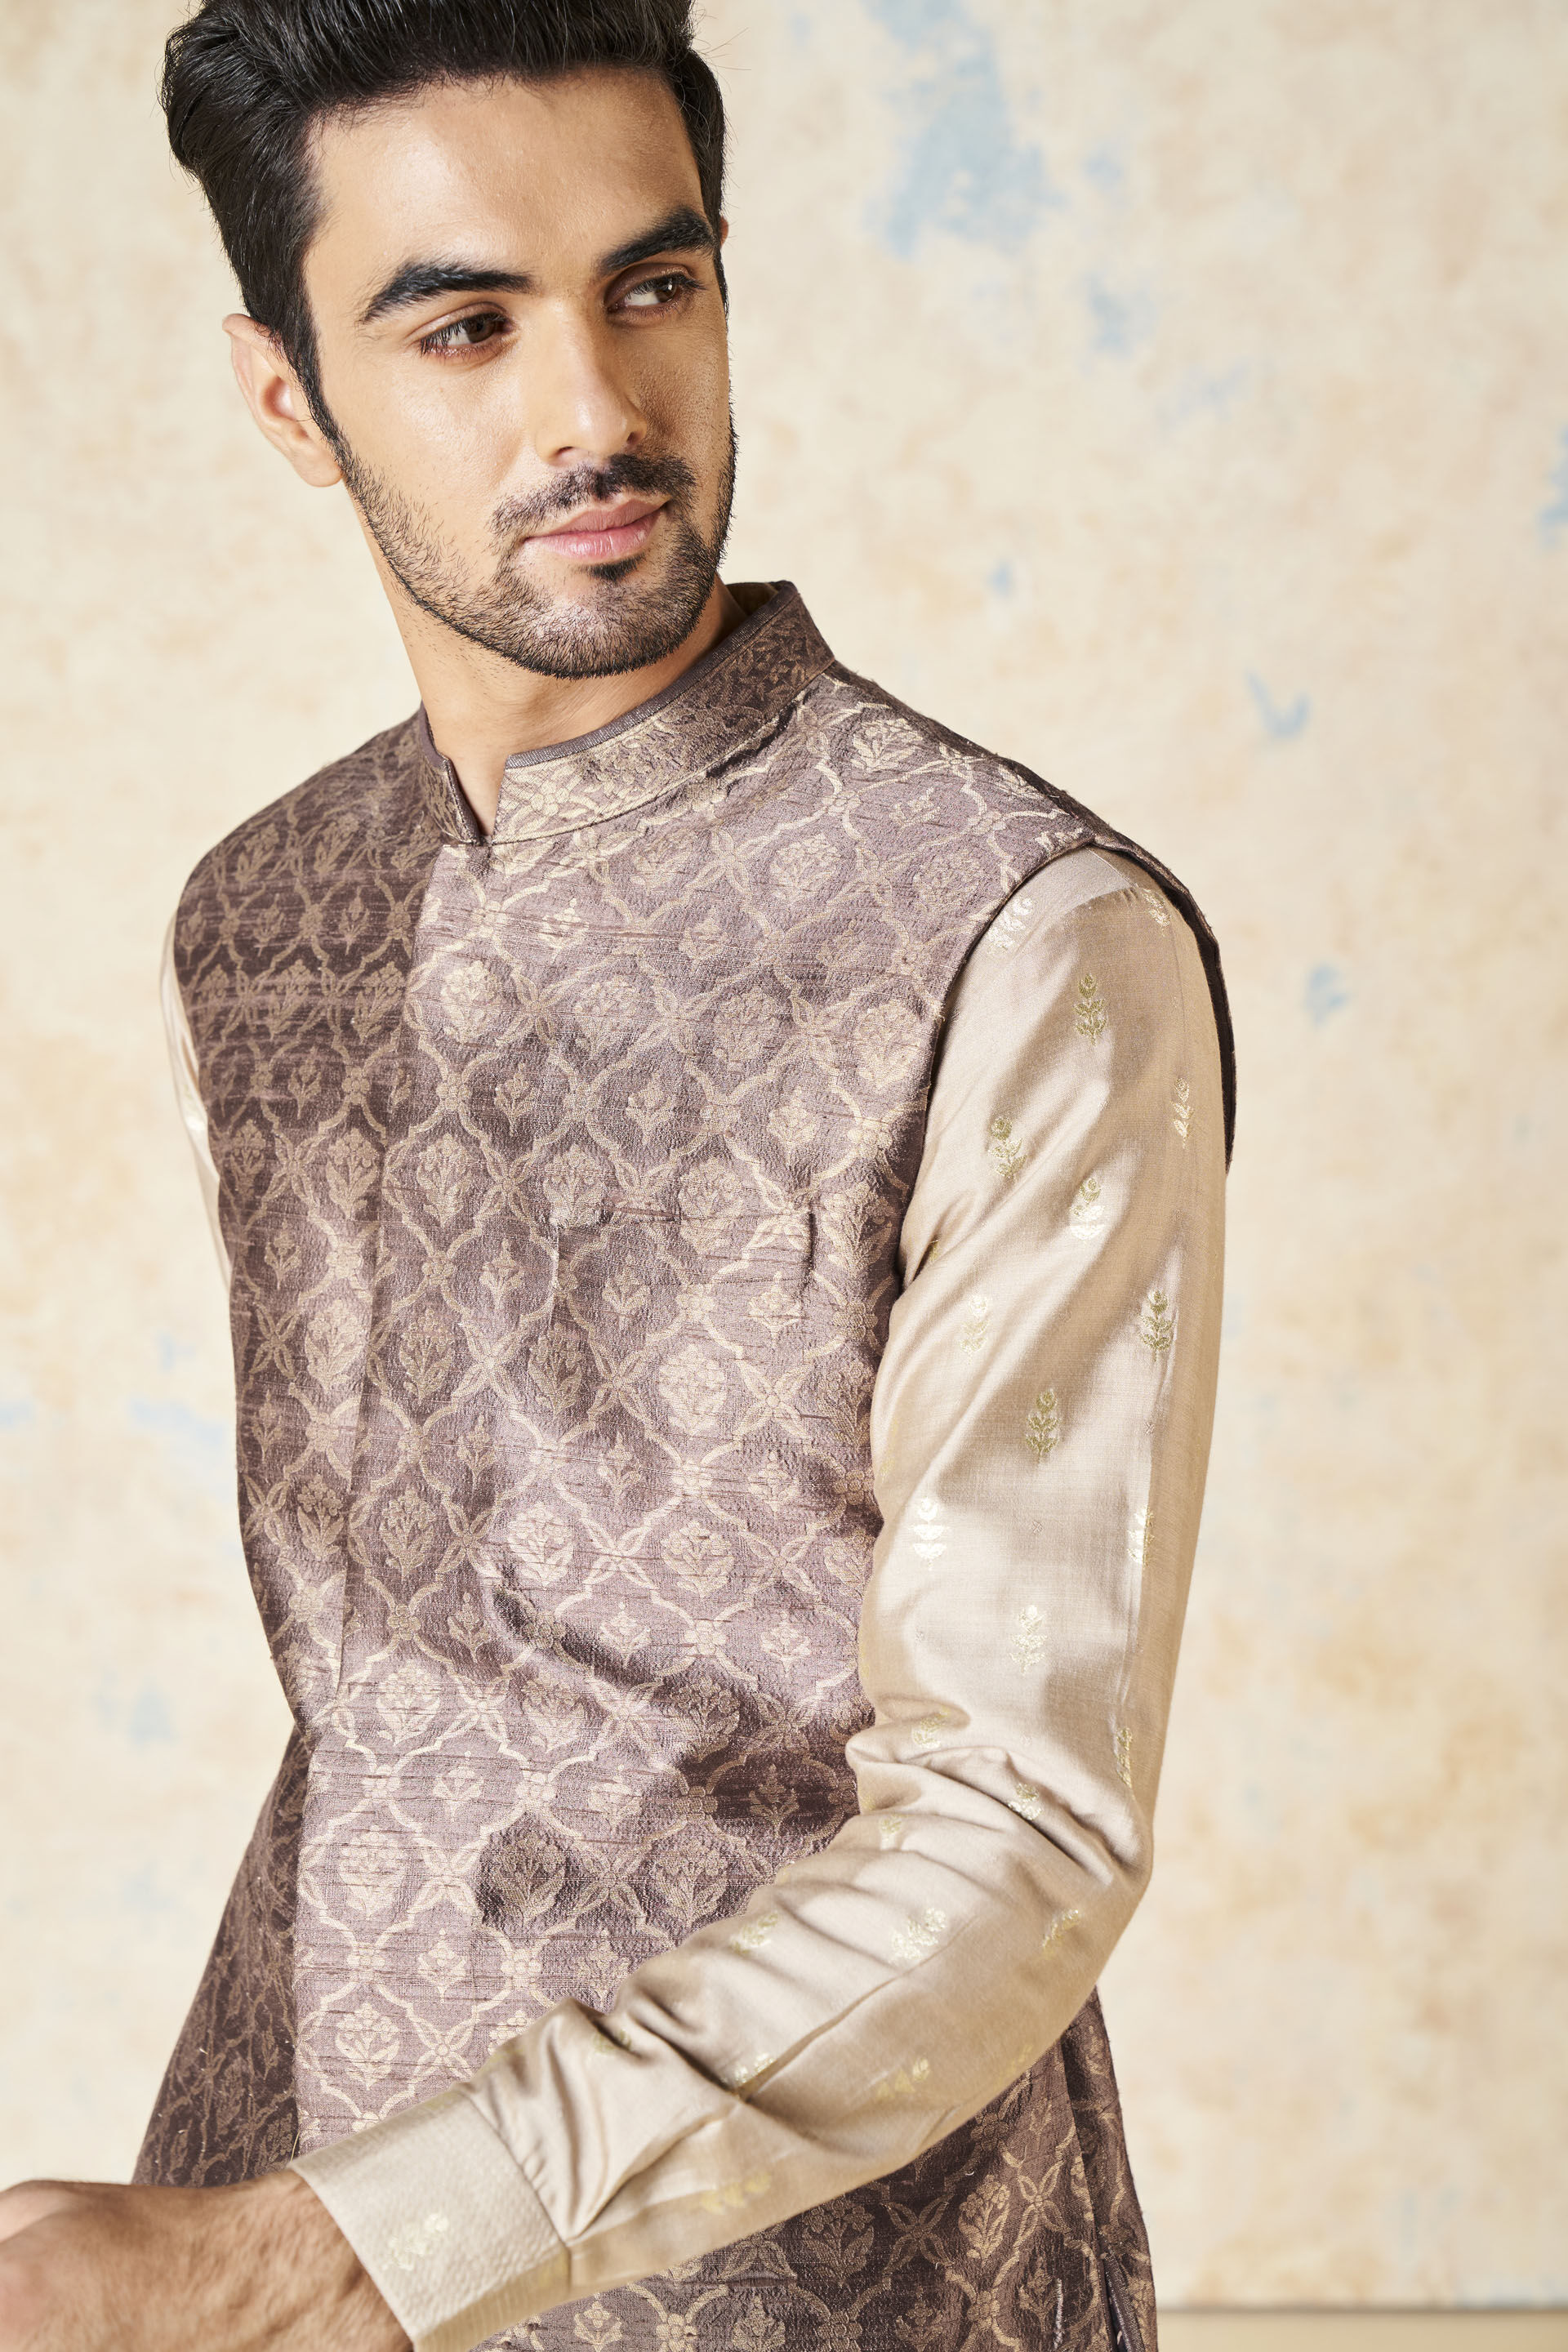 Nehru Jacket Combination for Wedding : Style Guide for Men